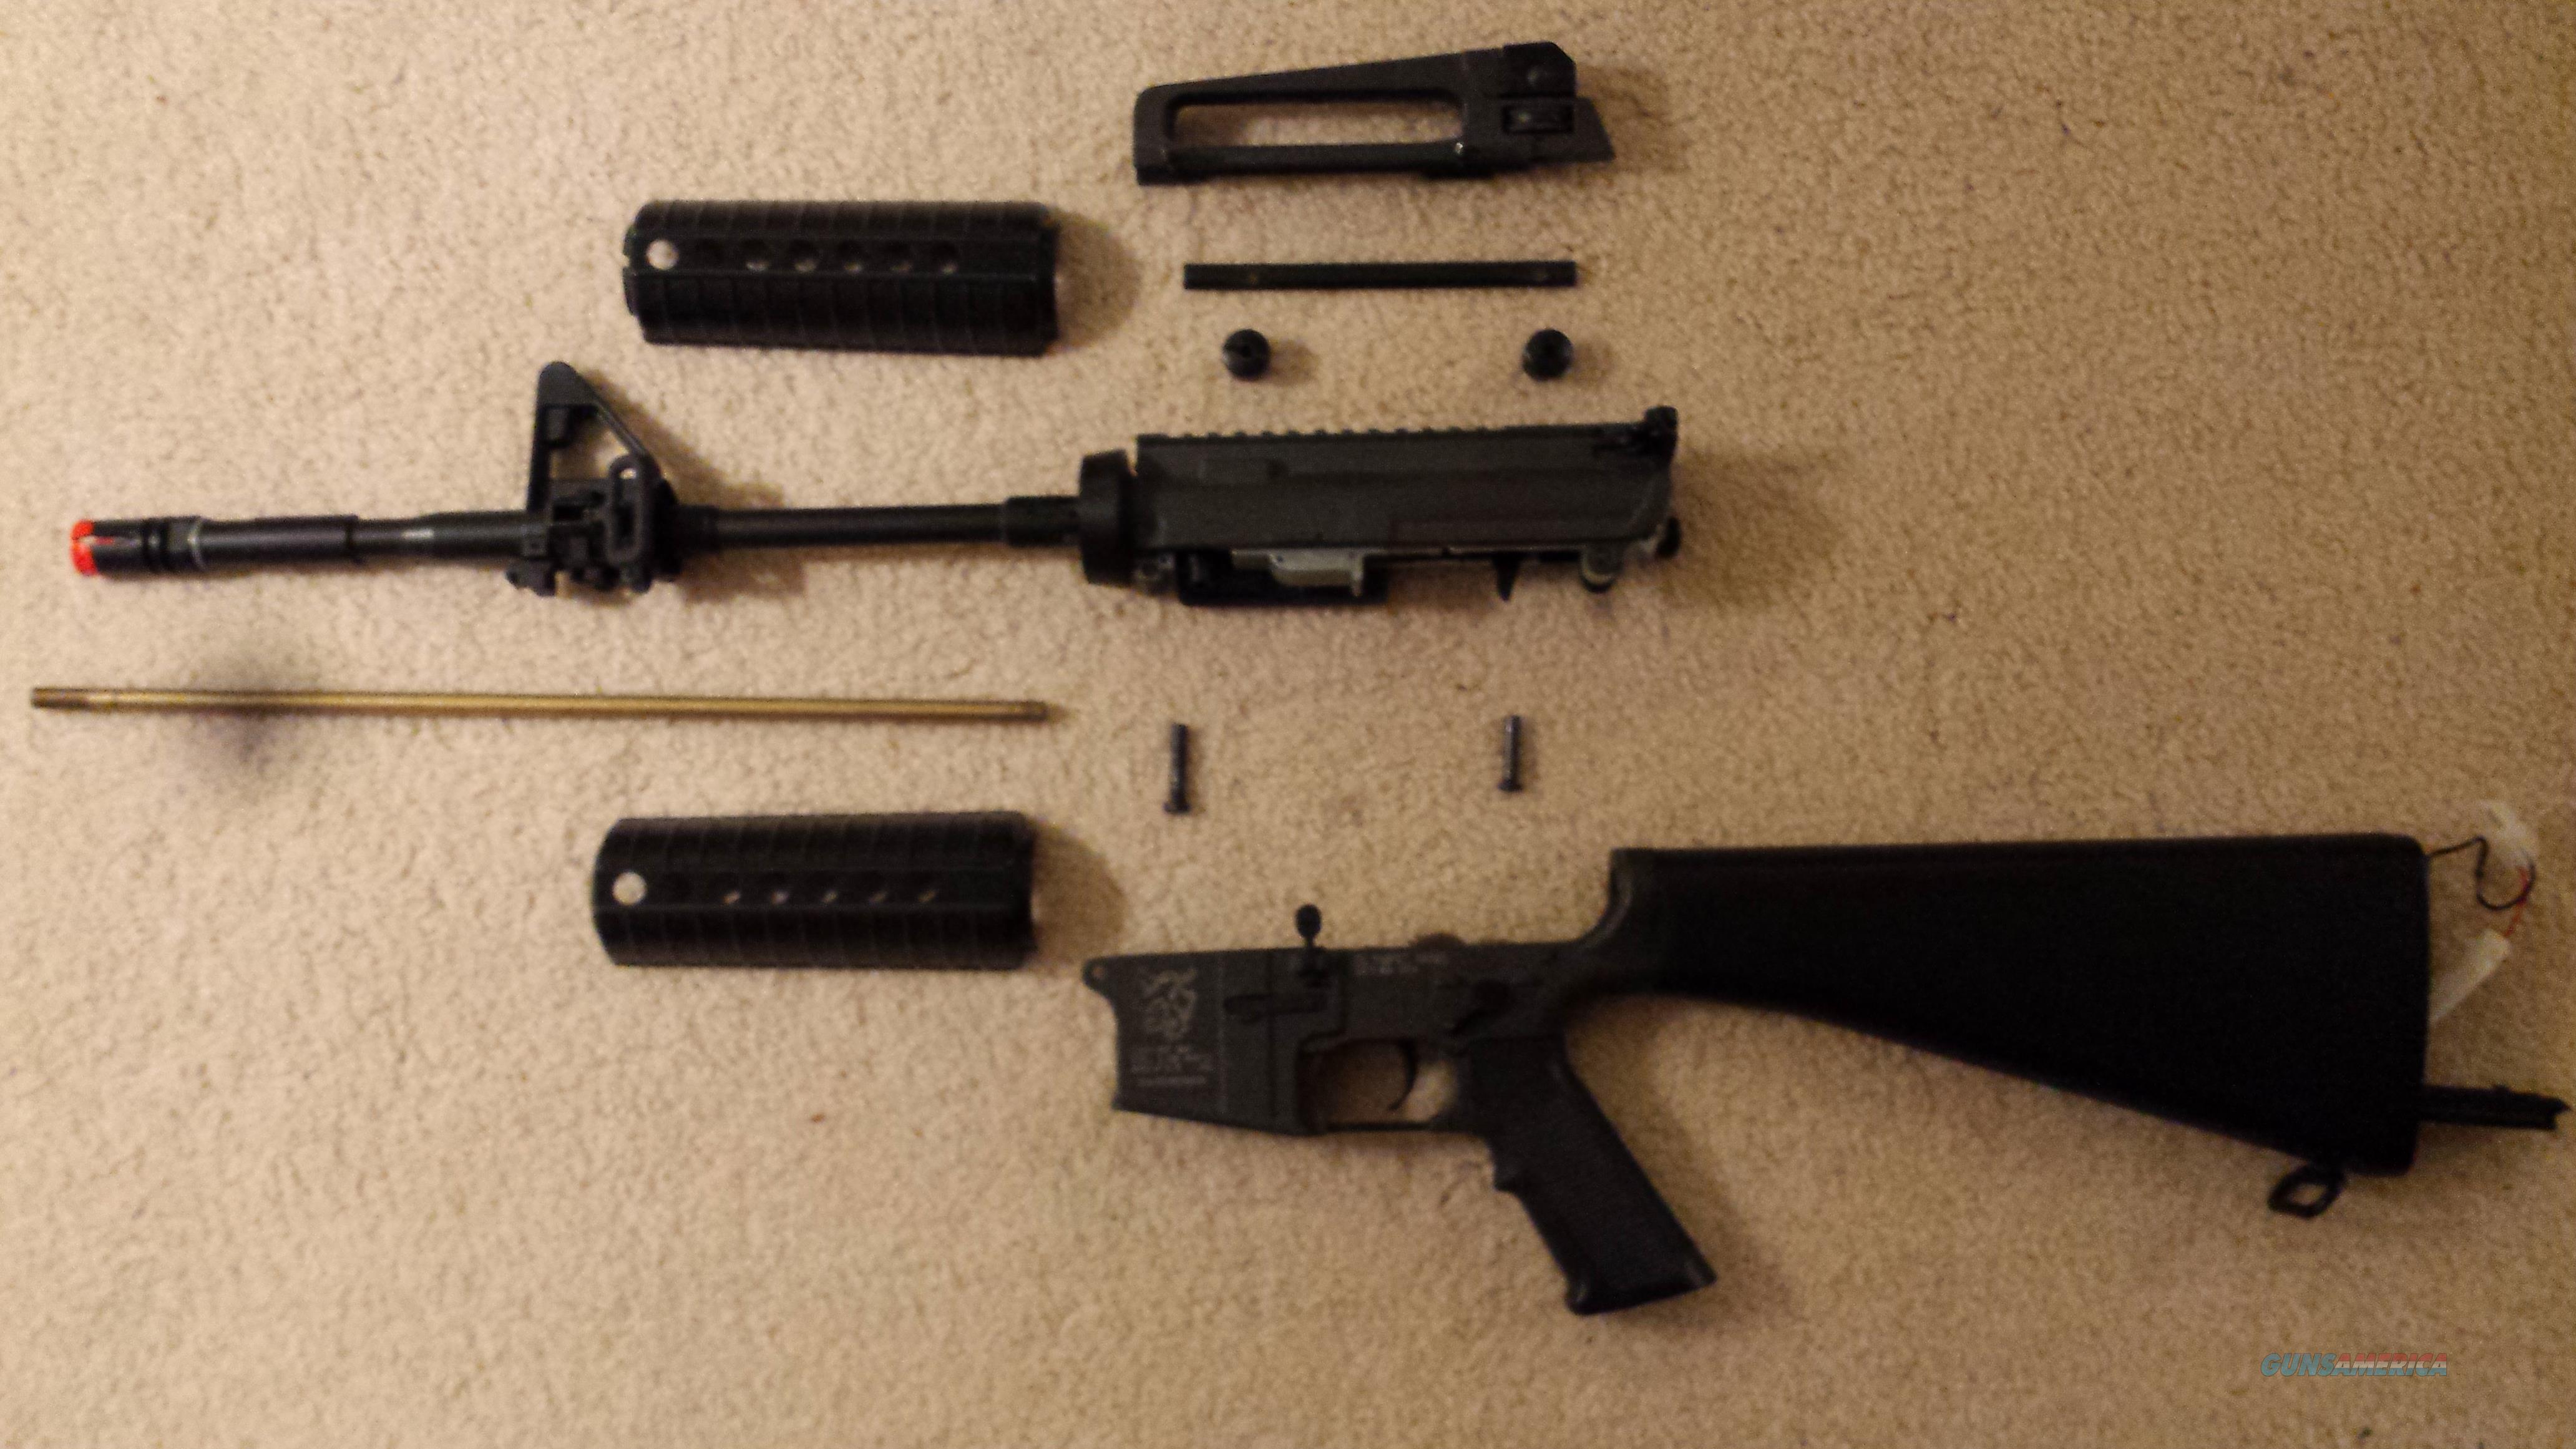 Upgraded ICS Olympic Arms M4A1 Repl... for sale at Gunsamerica.com ...